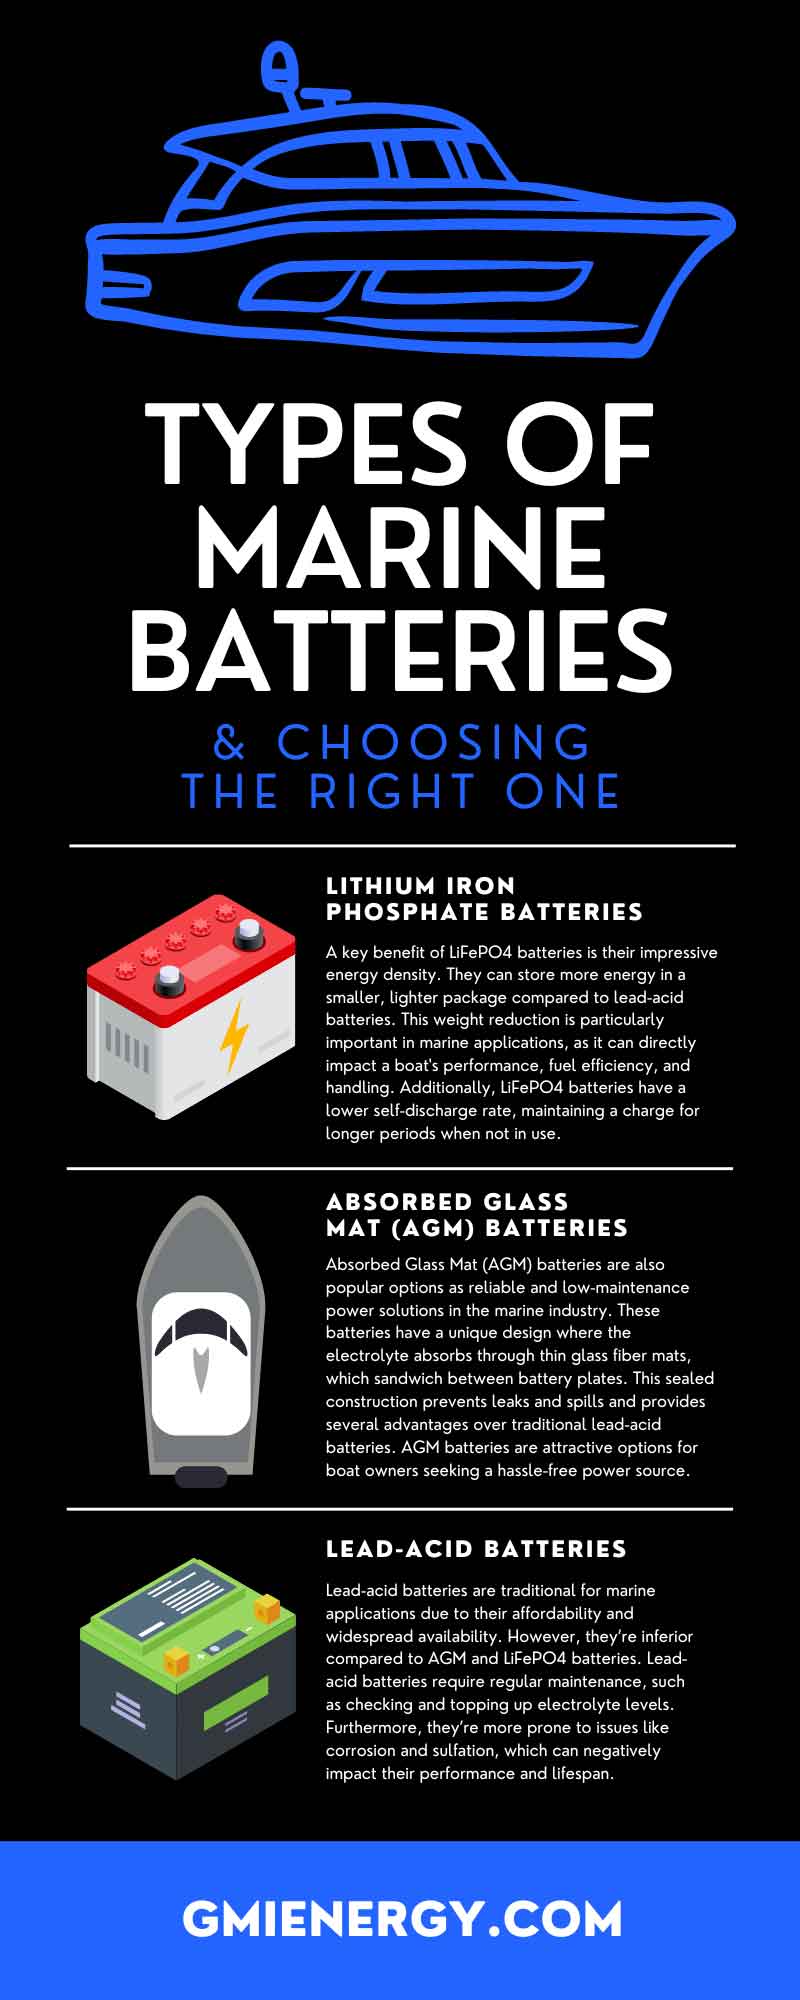 Types of Marine Batteries & Choosing the Right One